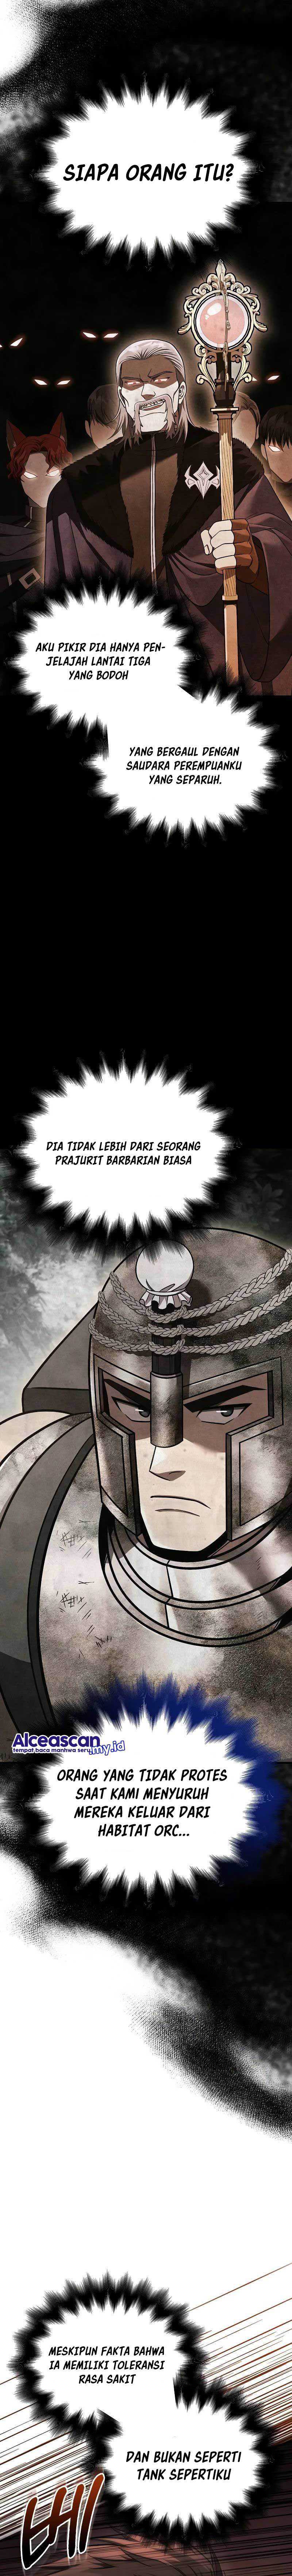 Survive as a Barbarian in the Game Chapter 51